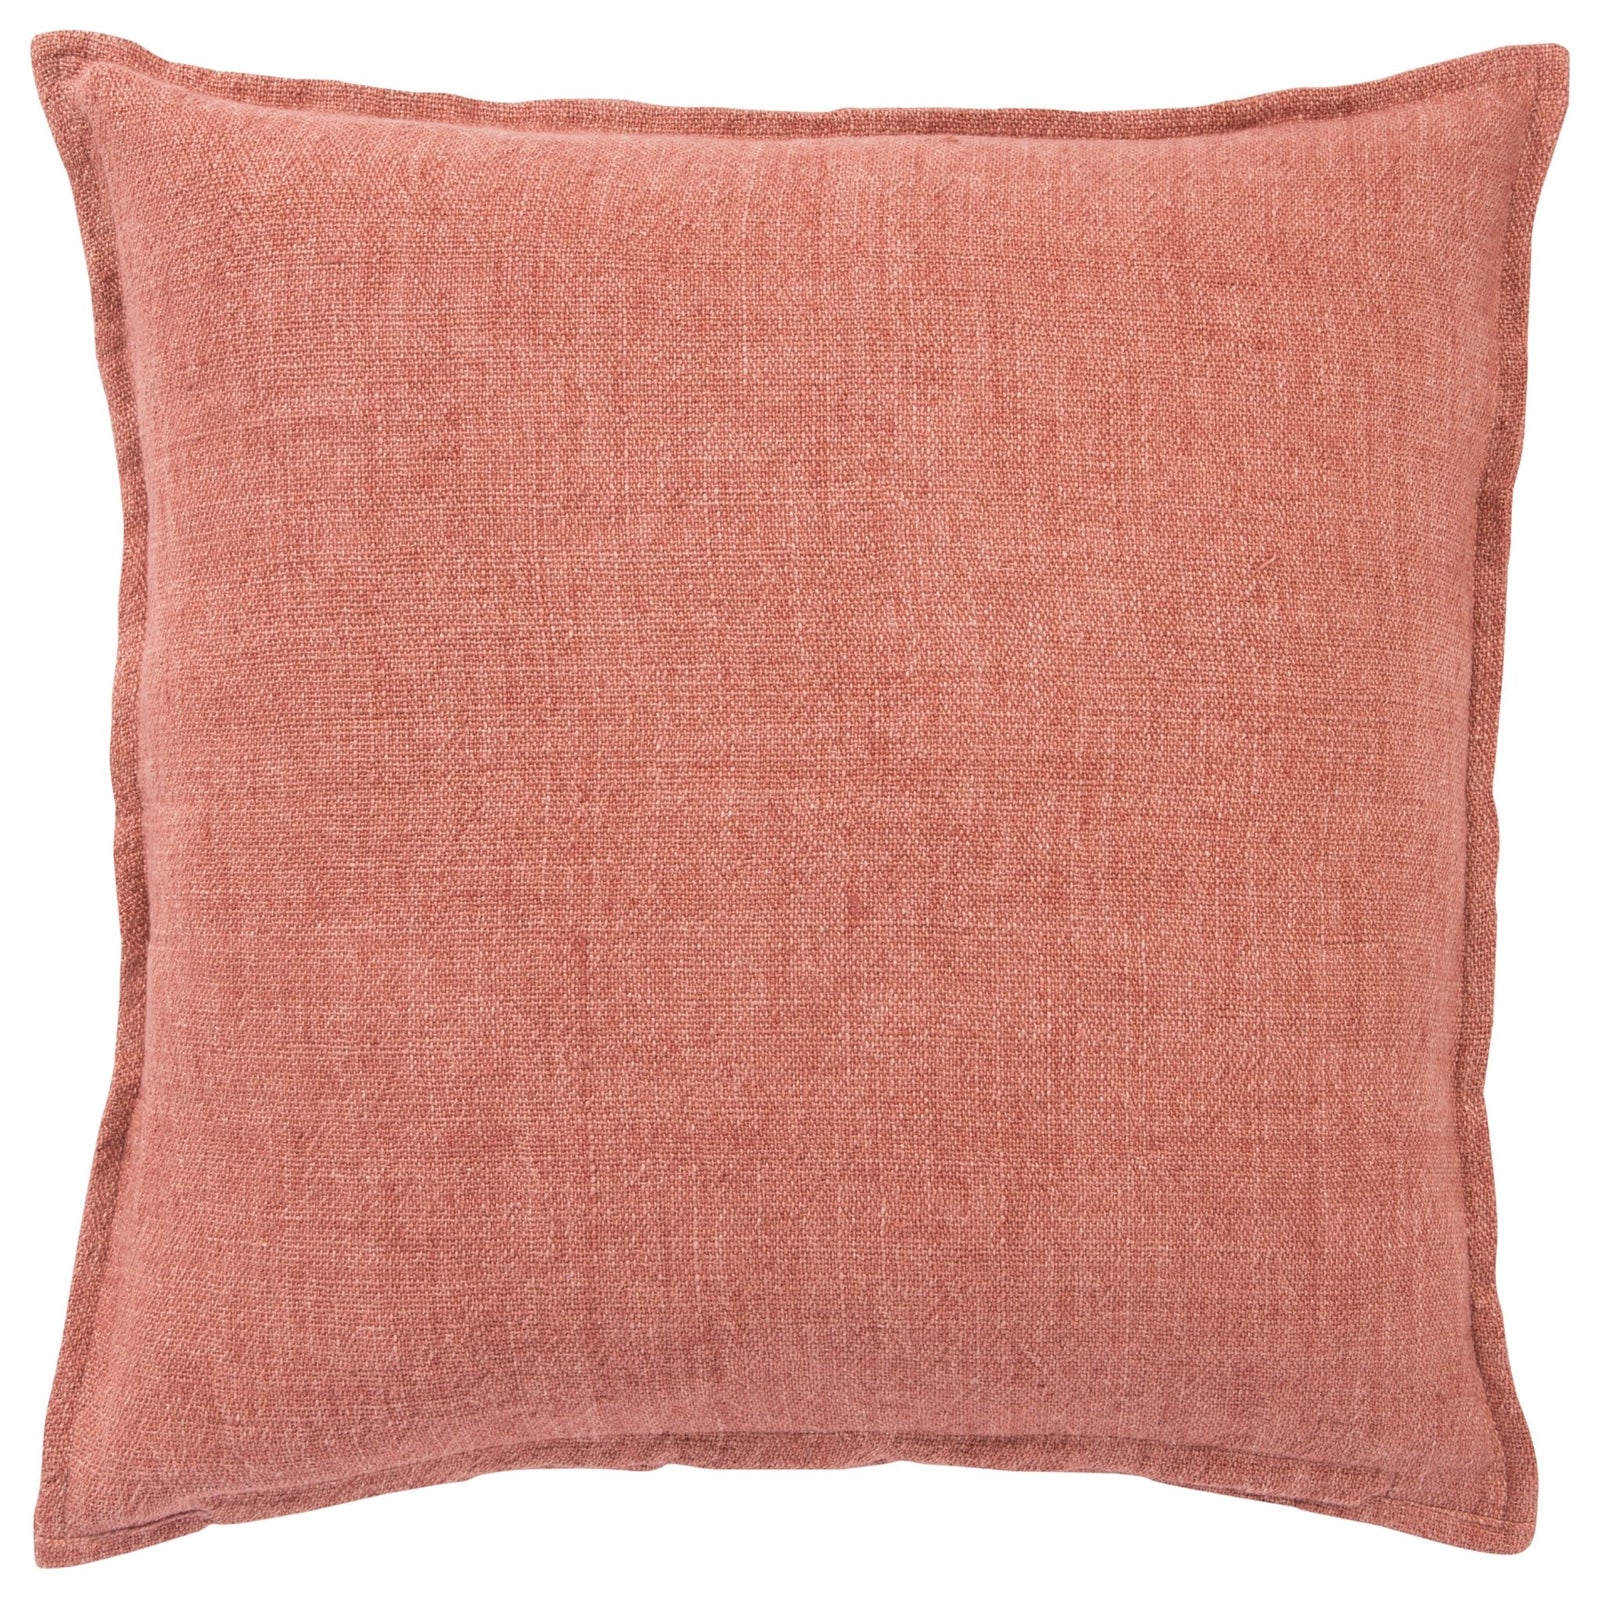 Burbank Brb01 Blanche Red Pillow - Rug & Home